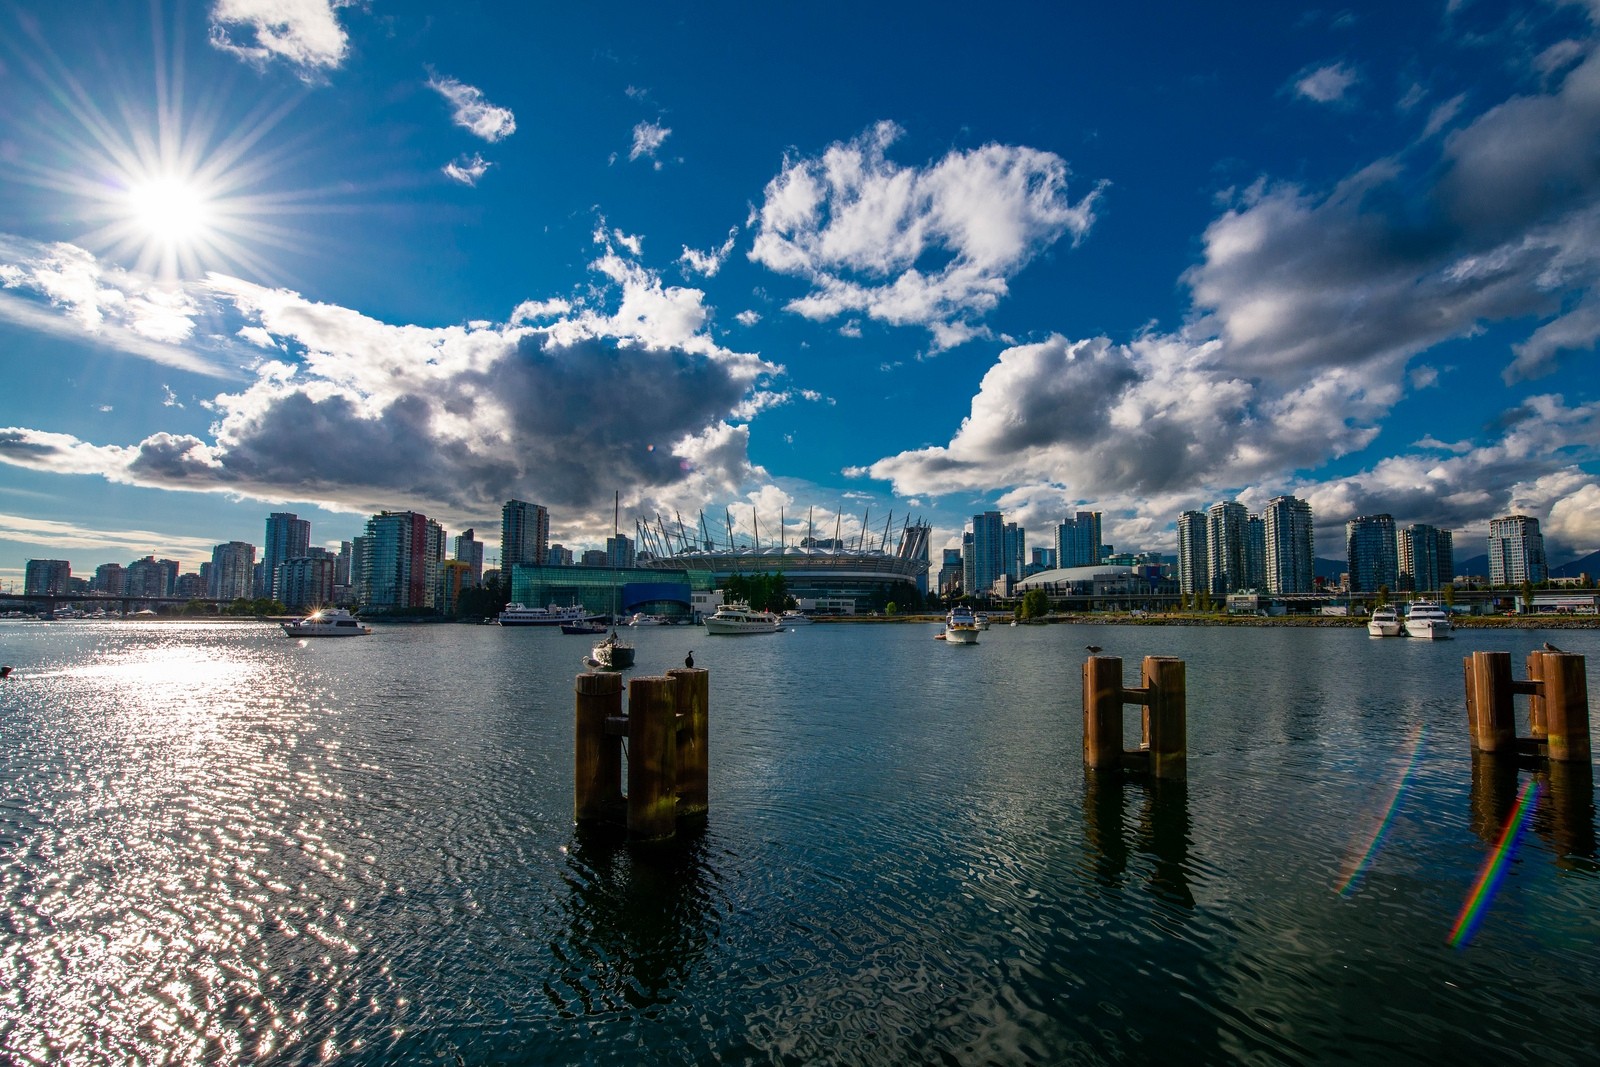 General 1600x1067 photography landscape nature sea ports sky clouds sun rays city building boat Vancouver Canada